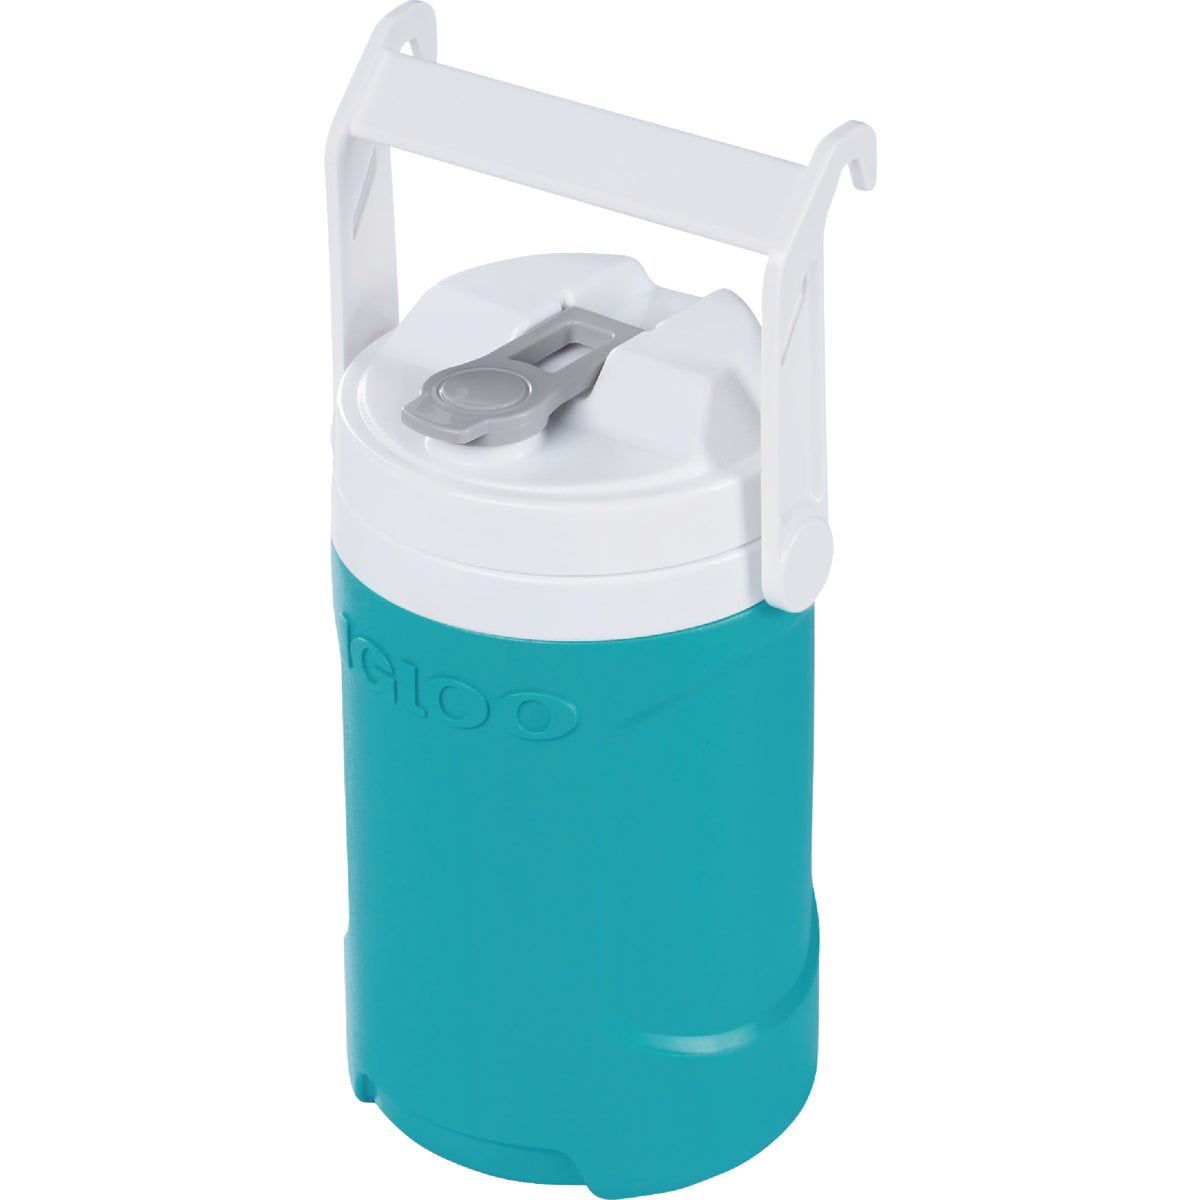 Igloo 2-Gallon (s) Beverage Cooler at